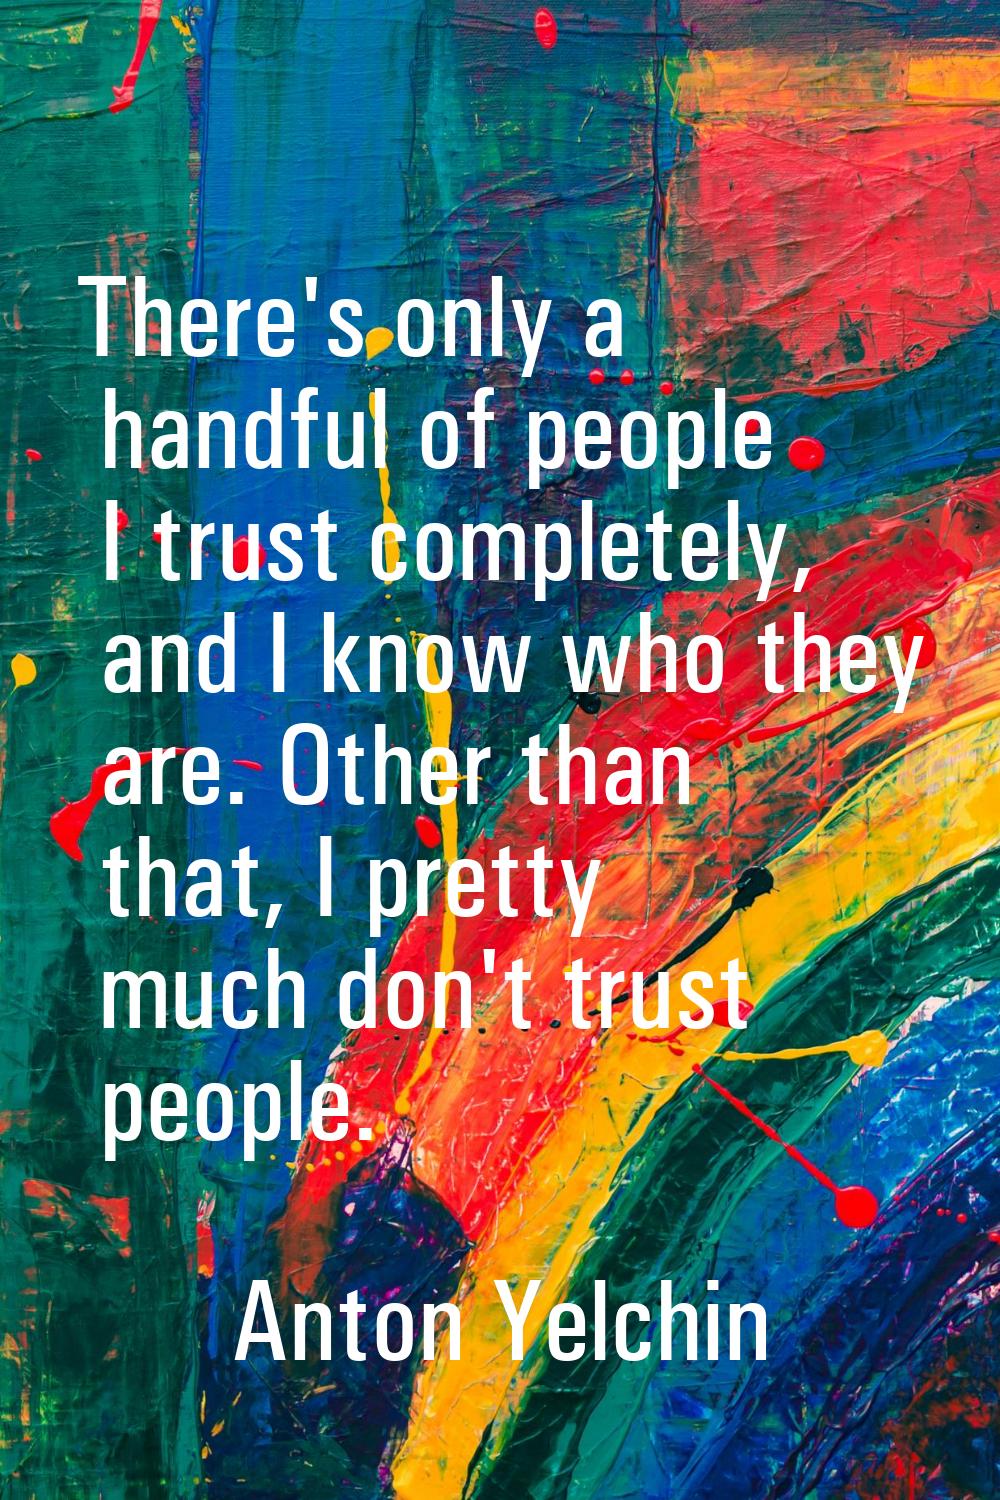 There's only a handful of people I trust completely, and I know who they are. Other than that, I pr